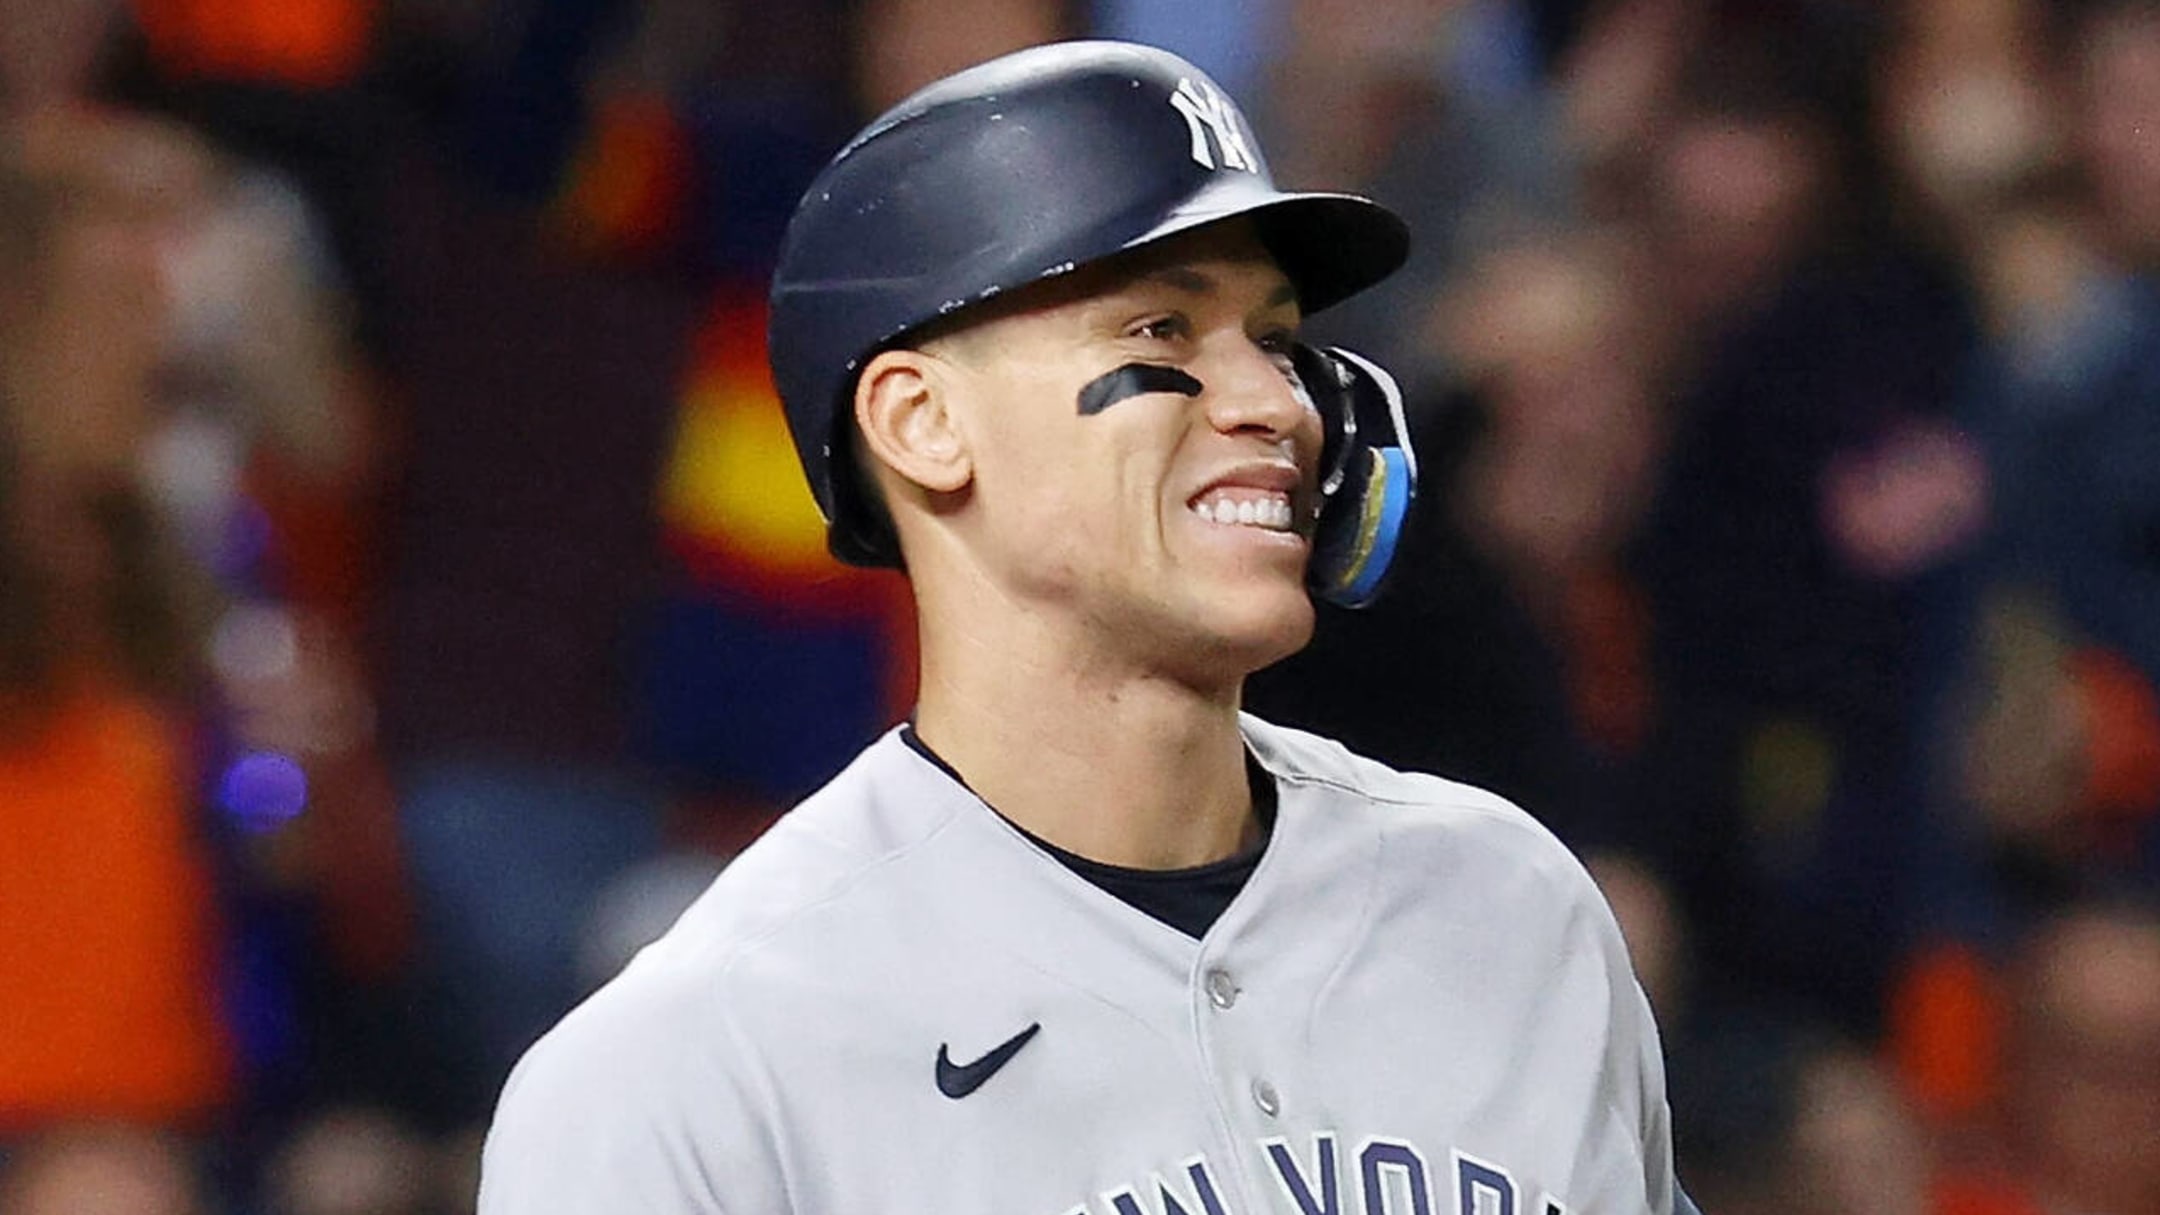 Jose Canseco: Aaron Judge should leave New York